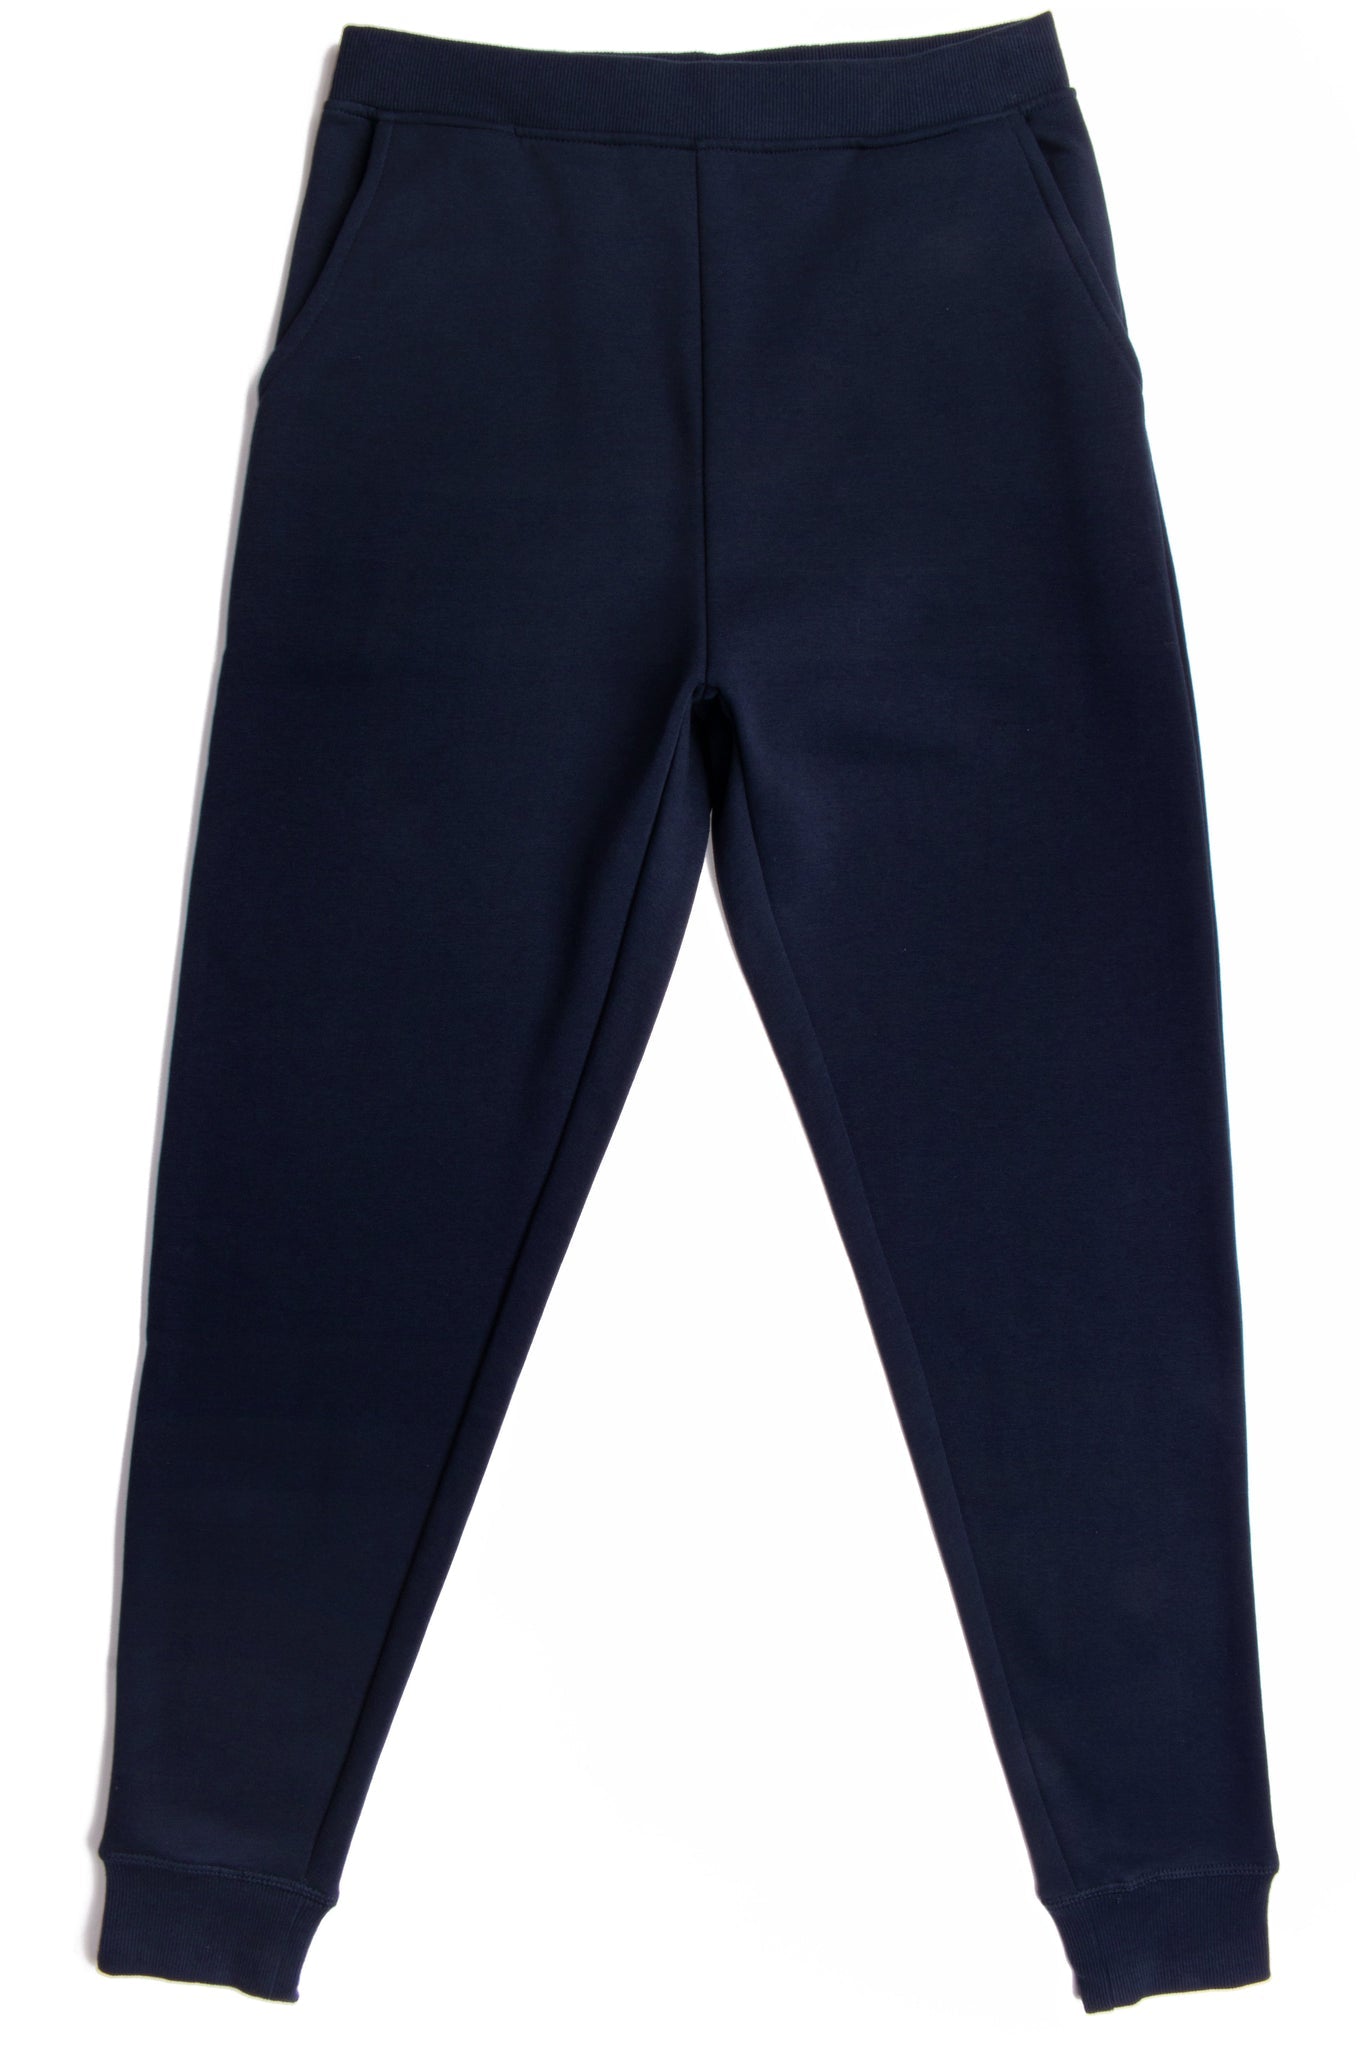 HERO - 5020R Unisex Joggers - Navy Blue (Relaxed Fit)